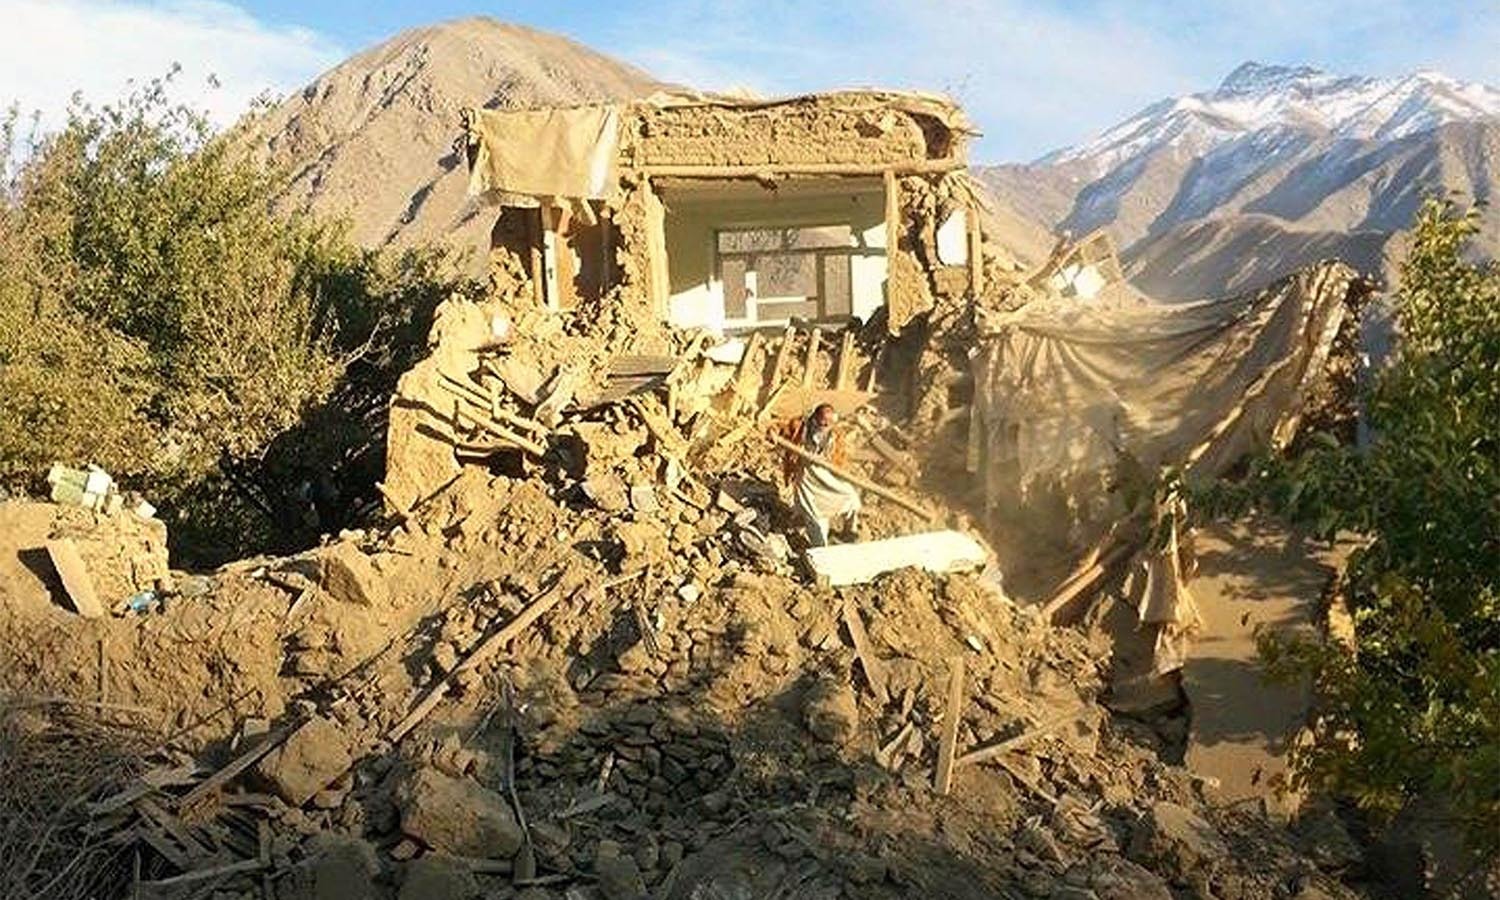 Afghan residents examine a damaged house after an earthquake in Raman Kheel village in the Panjshir valley on October 26, 2015. A powerful 7.5 magnitude earthquake killed at least 70 people as it rocked south Asia on October 26, including 12 Afghan girls crushed to death in a stampede as they tried to flee their collapsing school.  AFP PHOTO